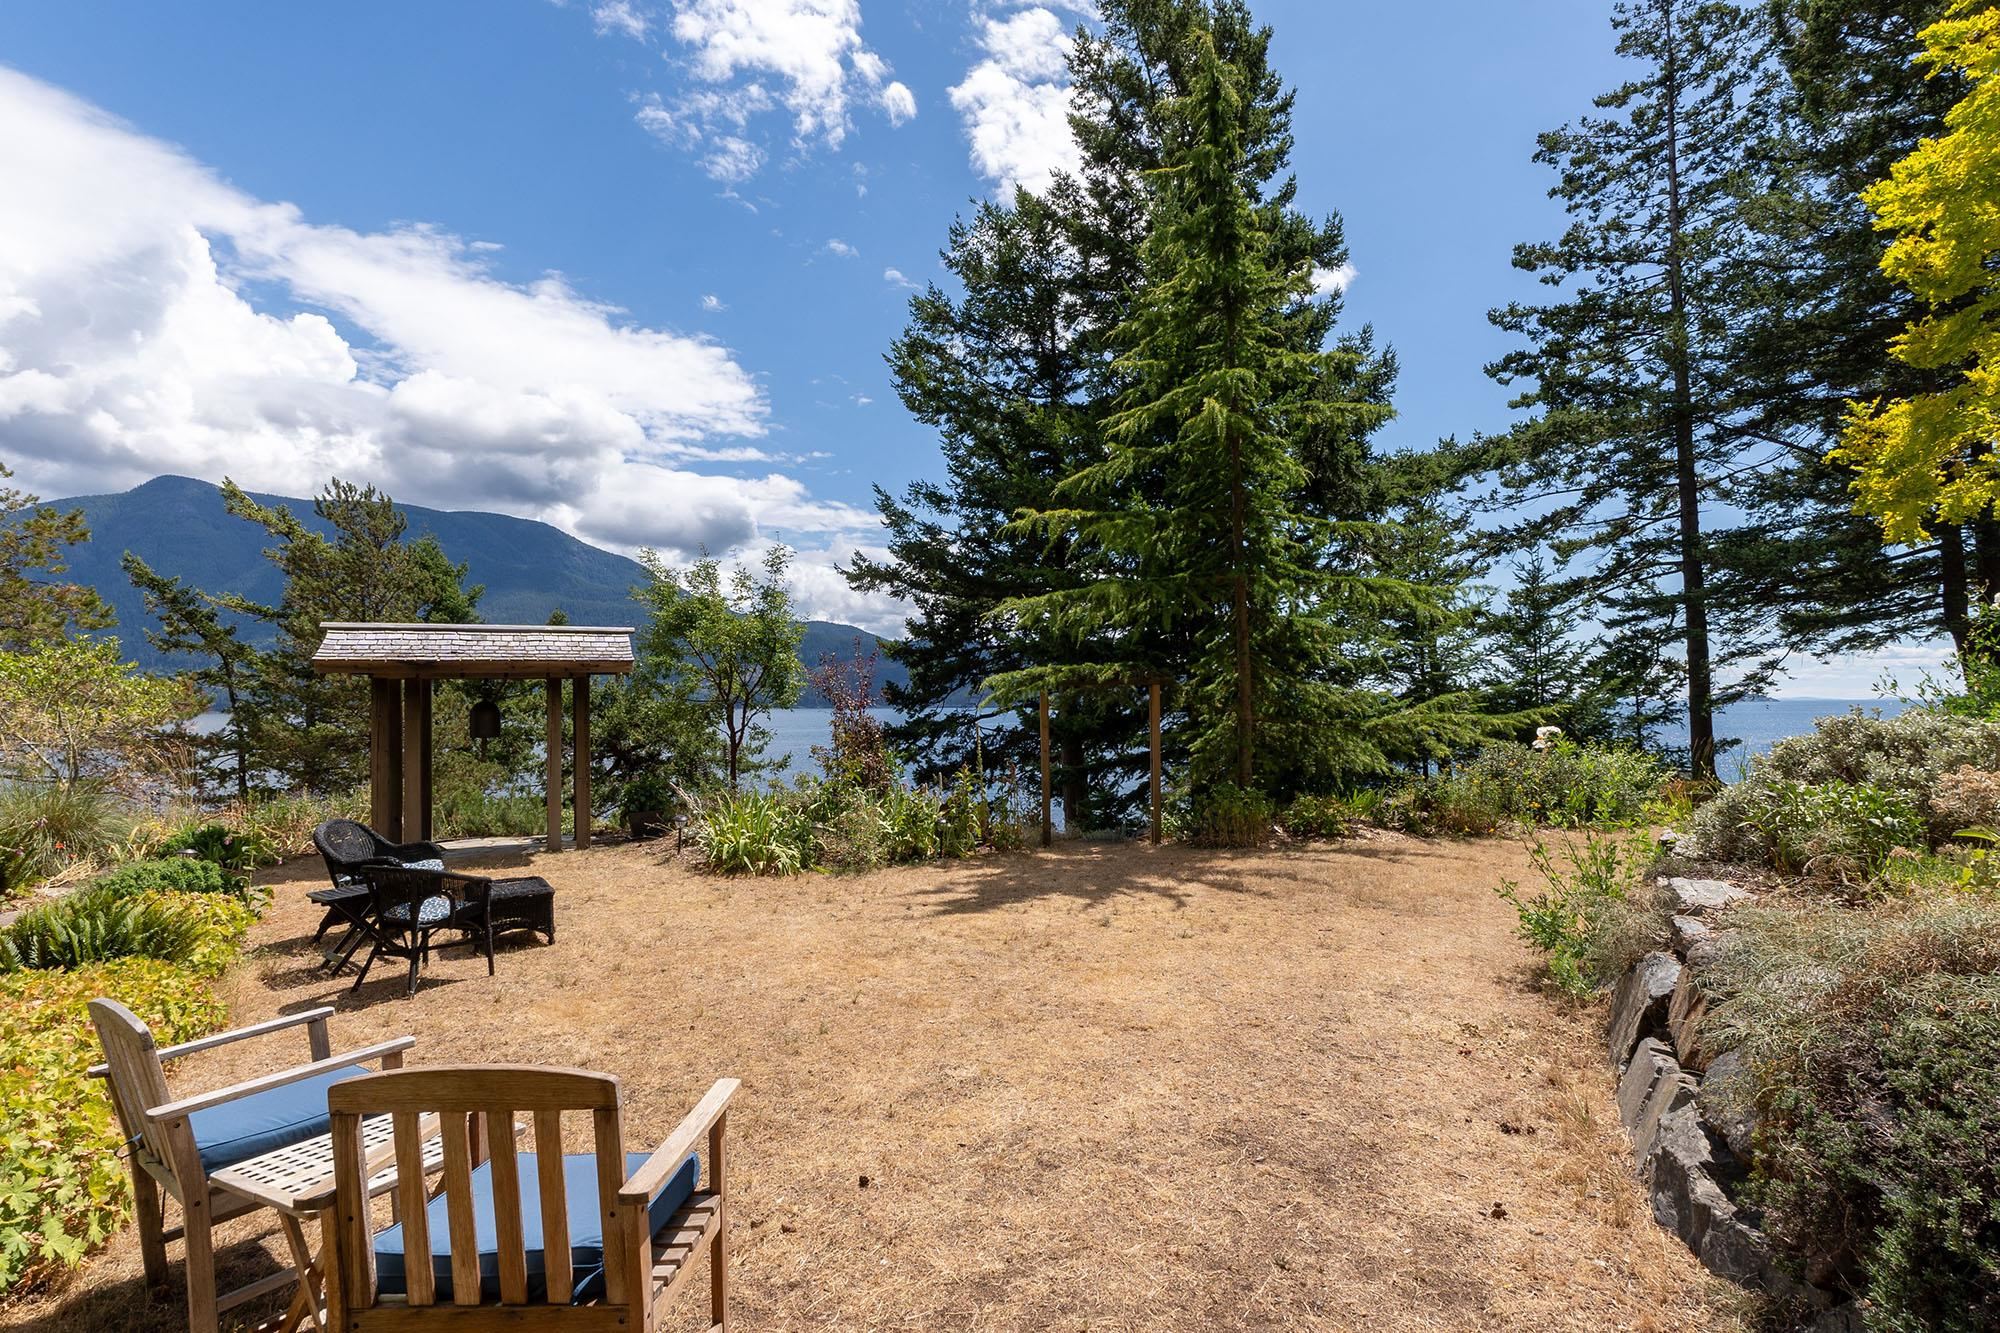 Listing image of 1545 EAGLE CLIFF ROAD